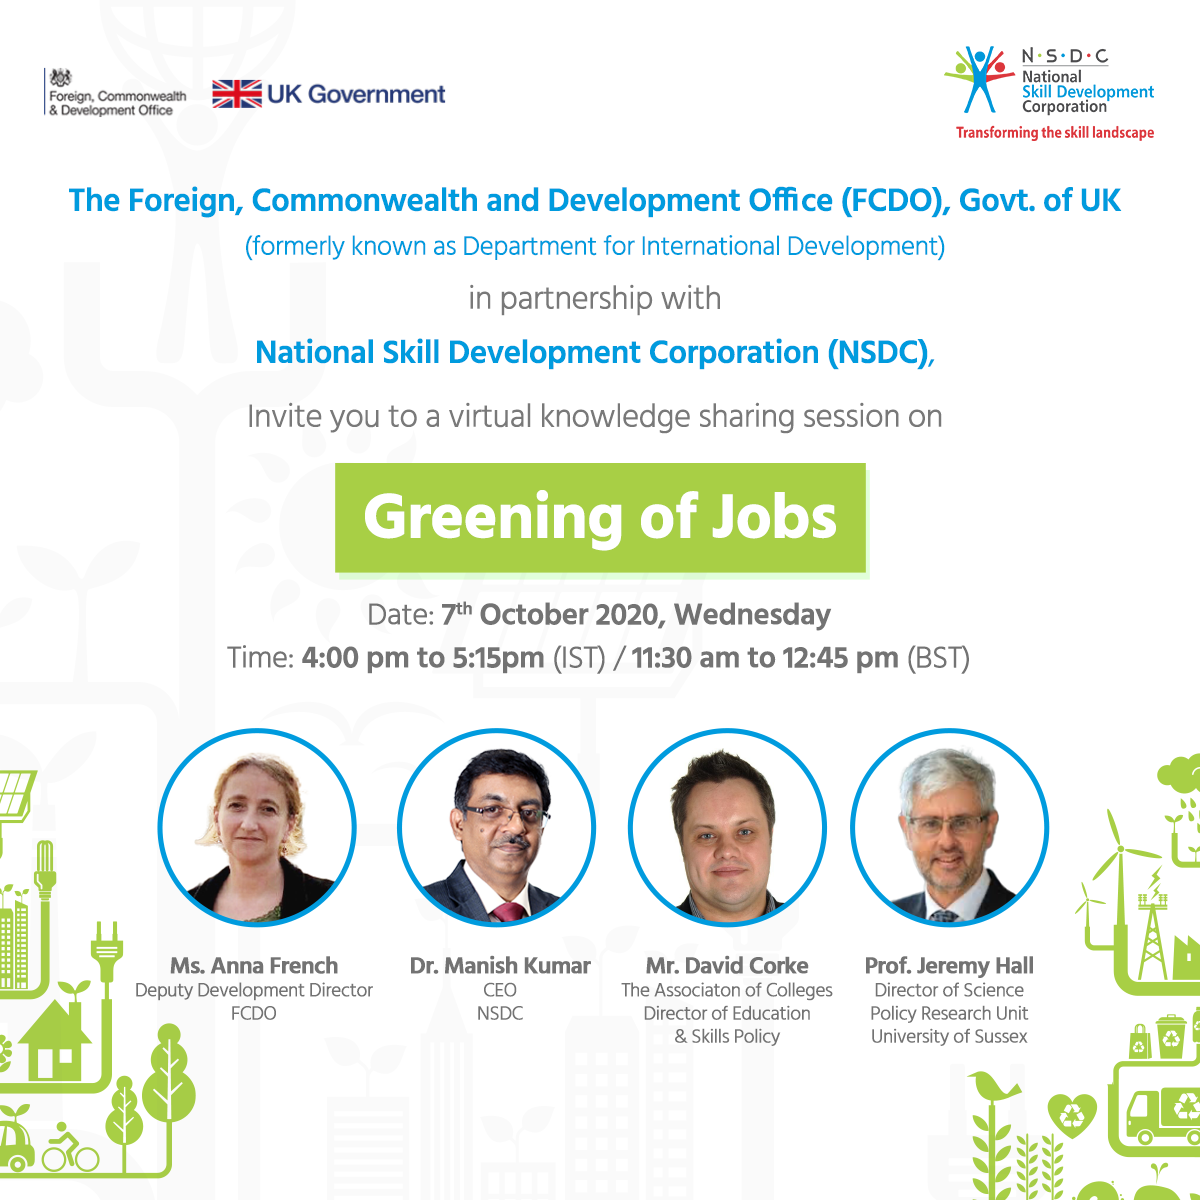 NSDC in partnership with Foreign, Commonwealth & Development Office, Govt. of UK invites you to a virtual knowledge sharing session on Greening of Jobs. Join the webinar on Wednesday, 7th October at 4 pm. Join here: https://bit.ly/34M6V7B